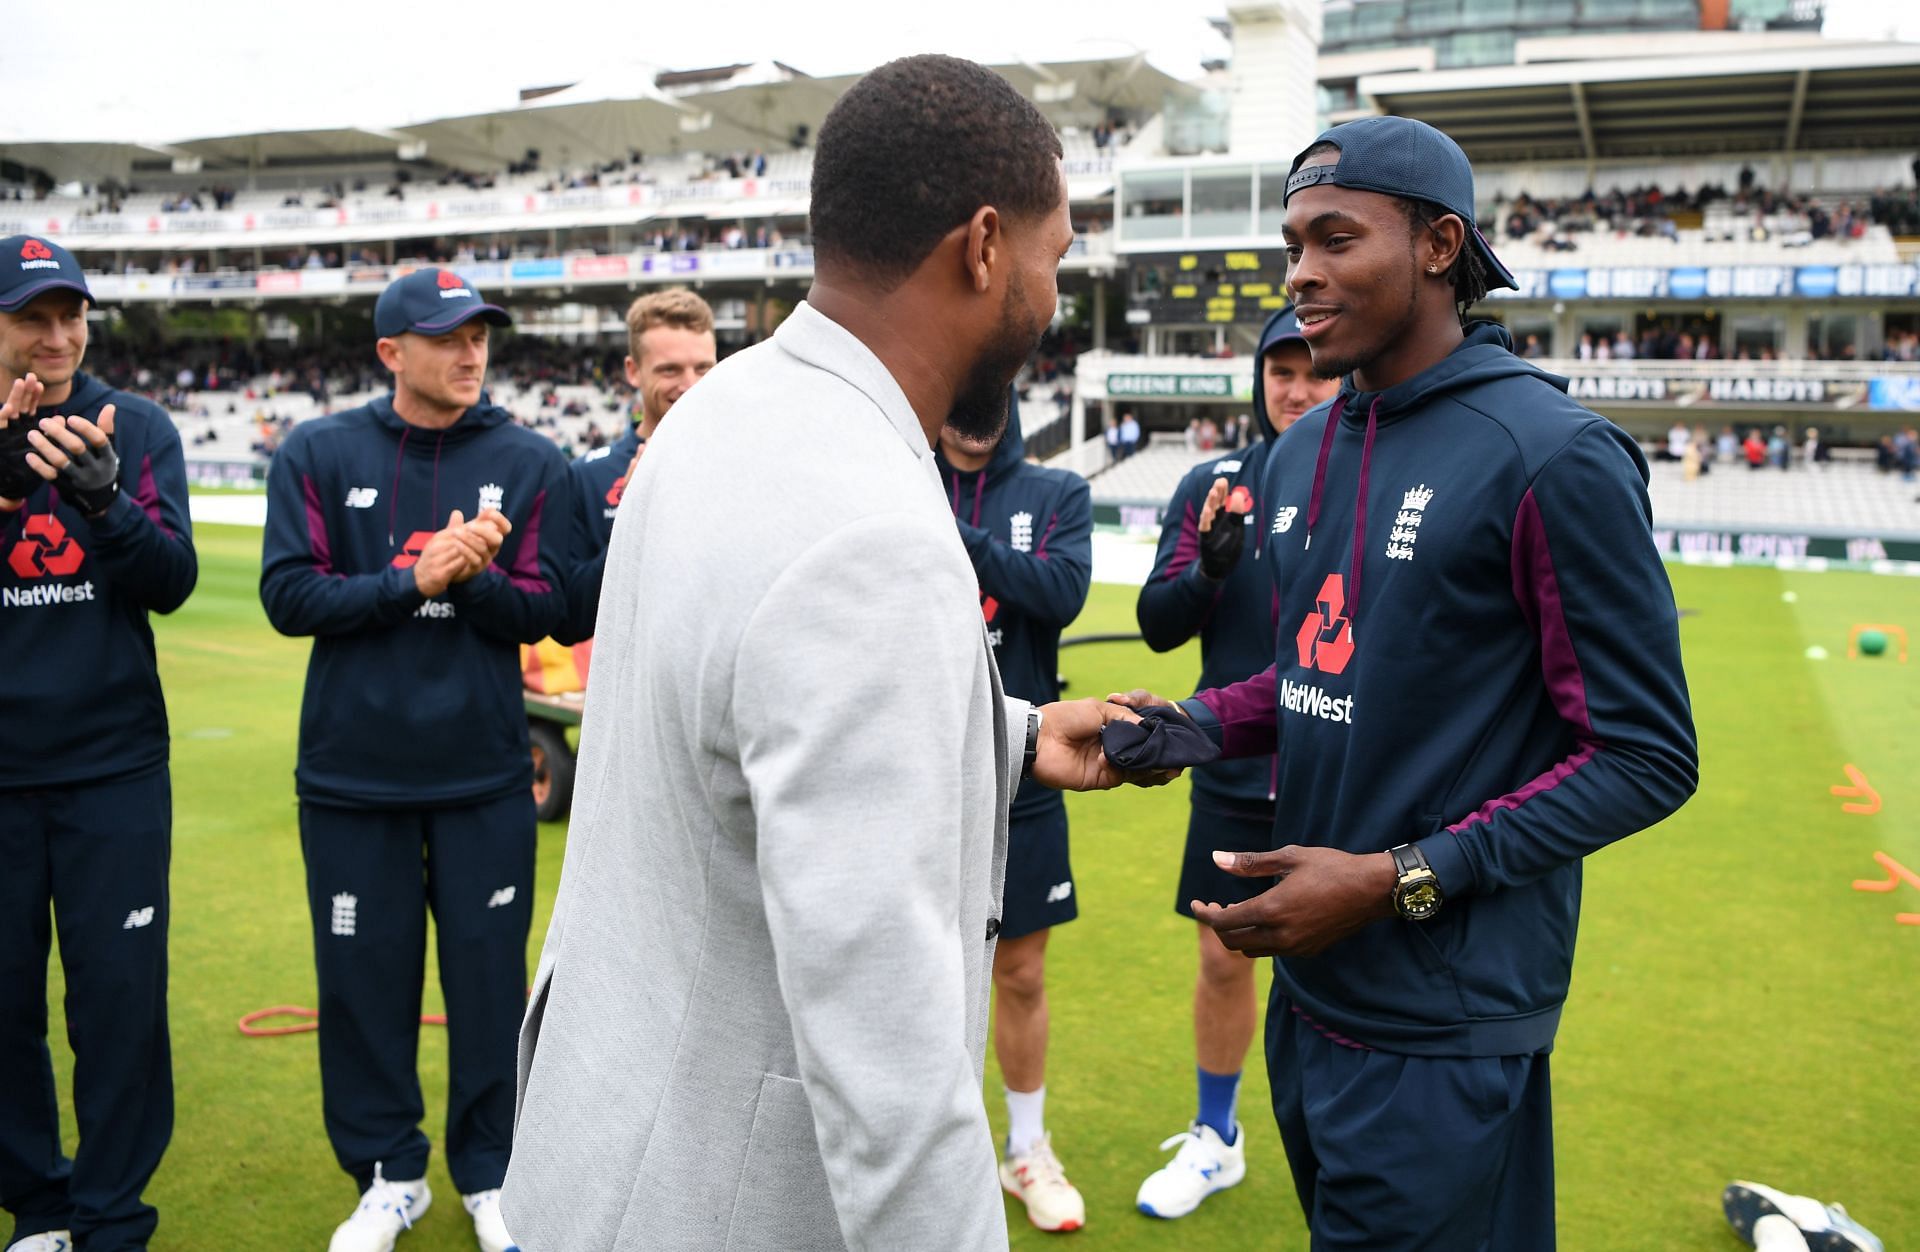 Jofra Archer made his Test debut at Lord&#039;s in the 2019 Ashes series